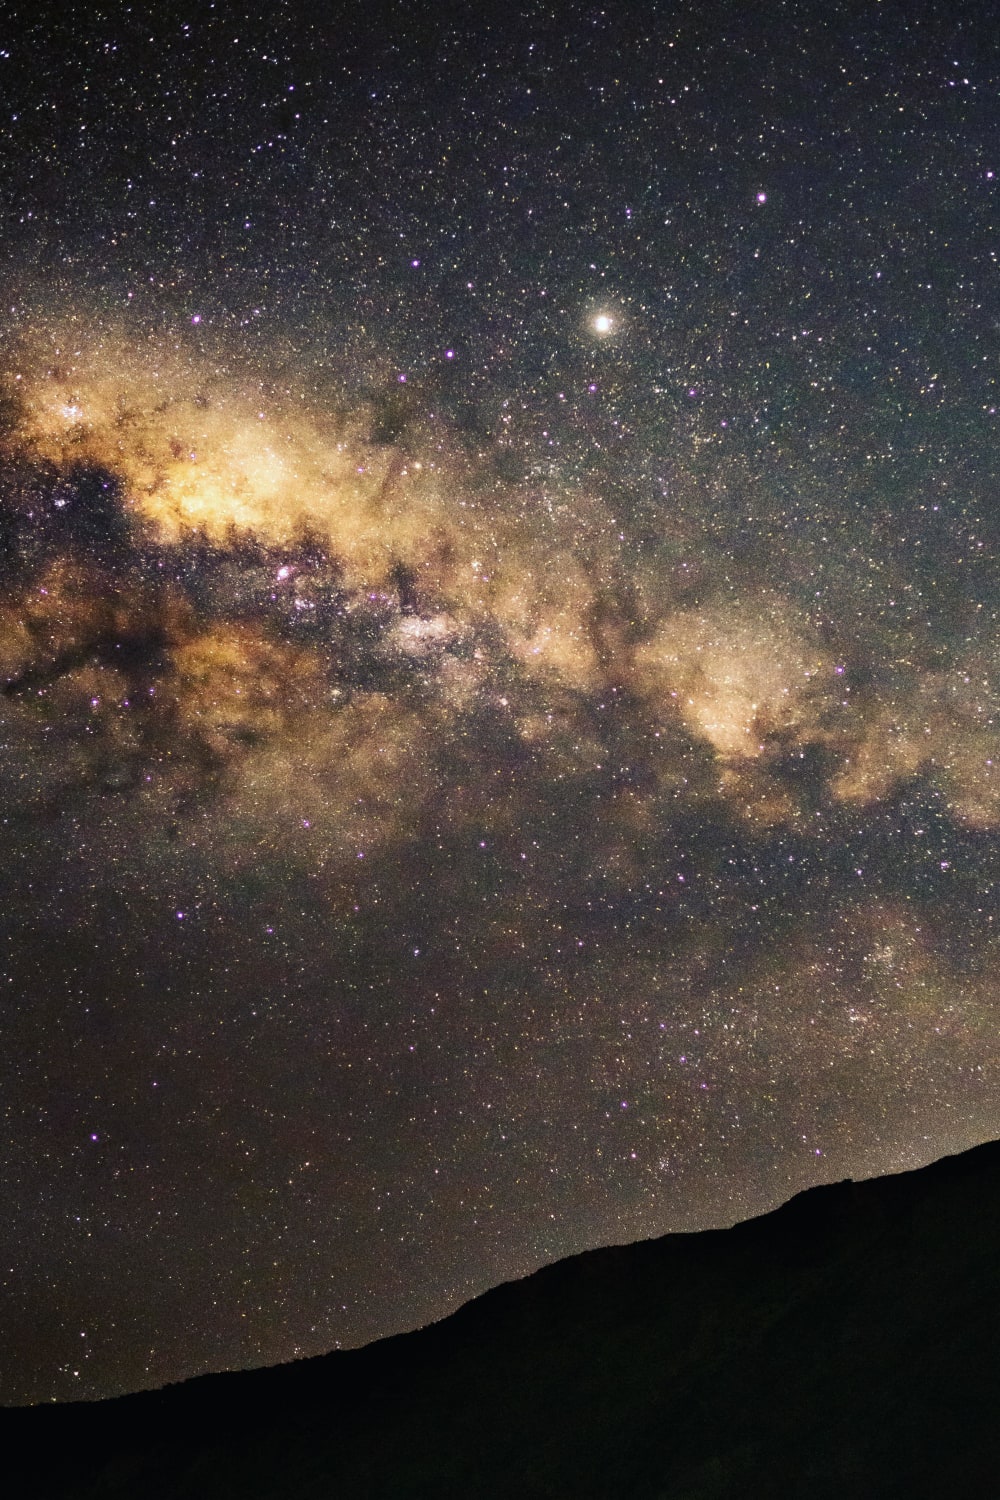 Captured Jupiter over the Milky Way belt near Red Rocks, New Zealand the other night. Couldn't believe this was 15 minutes from the city's center.